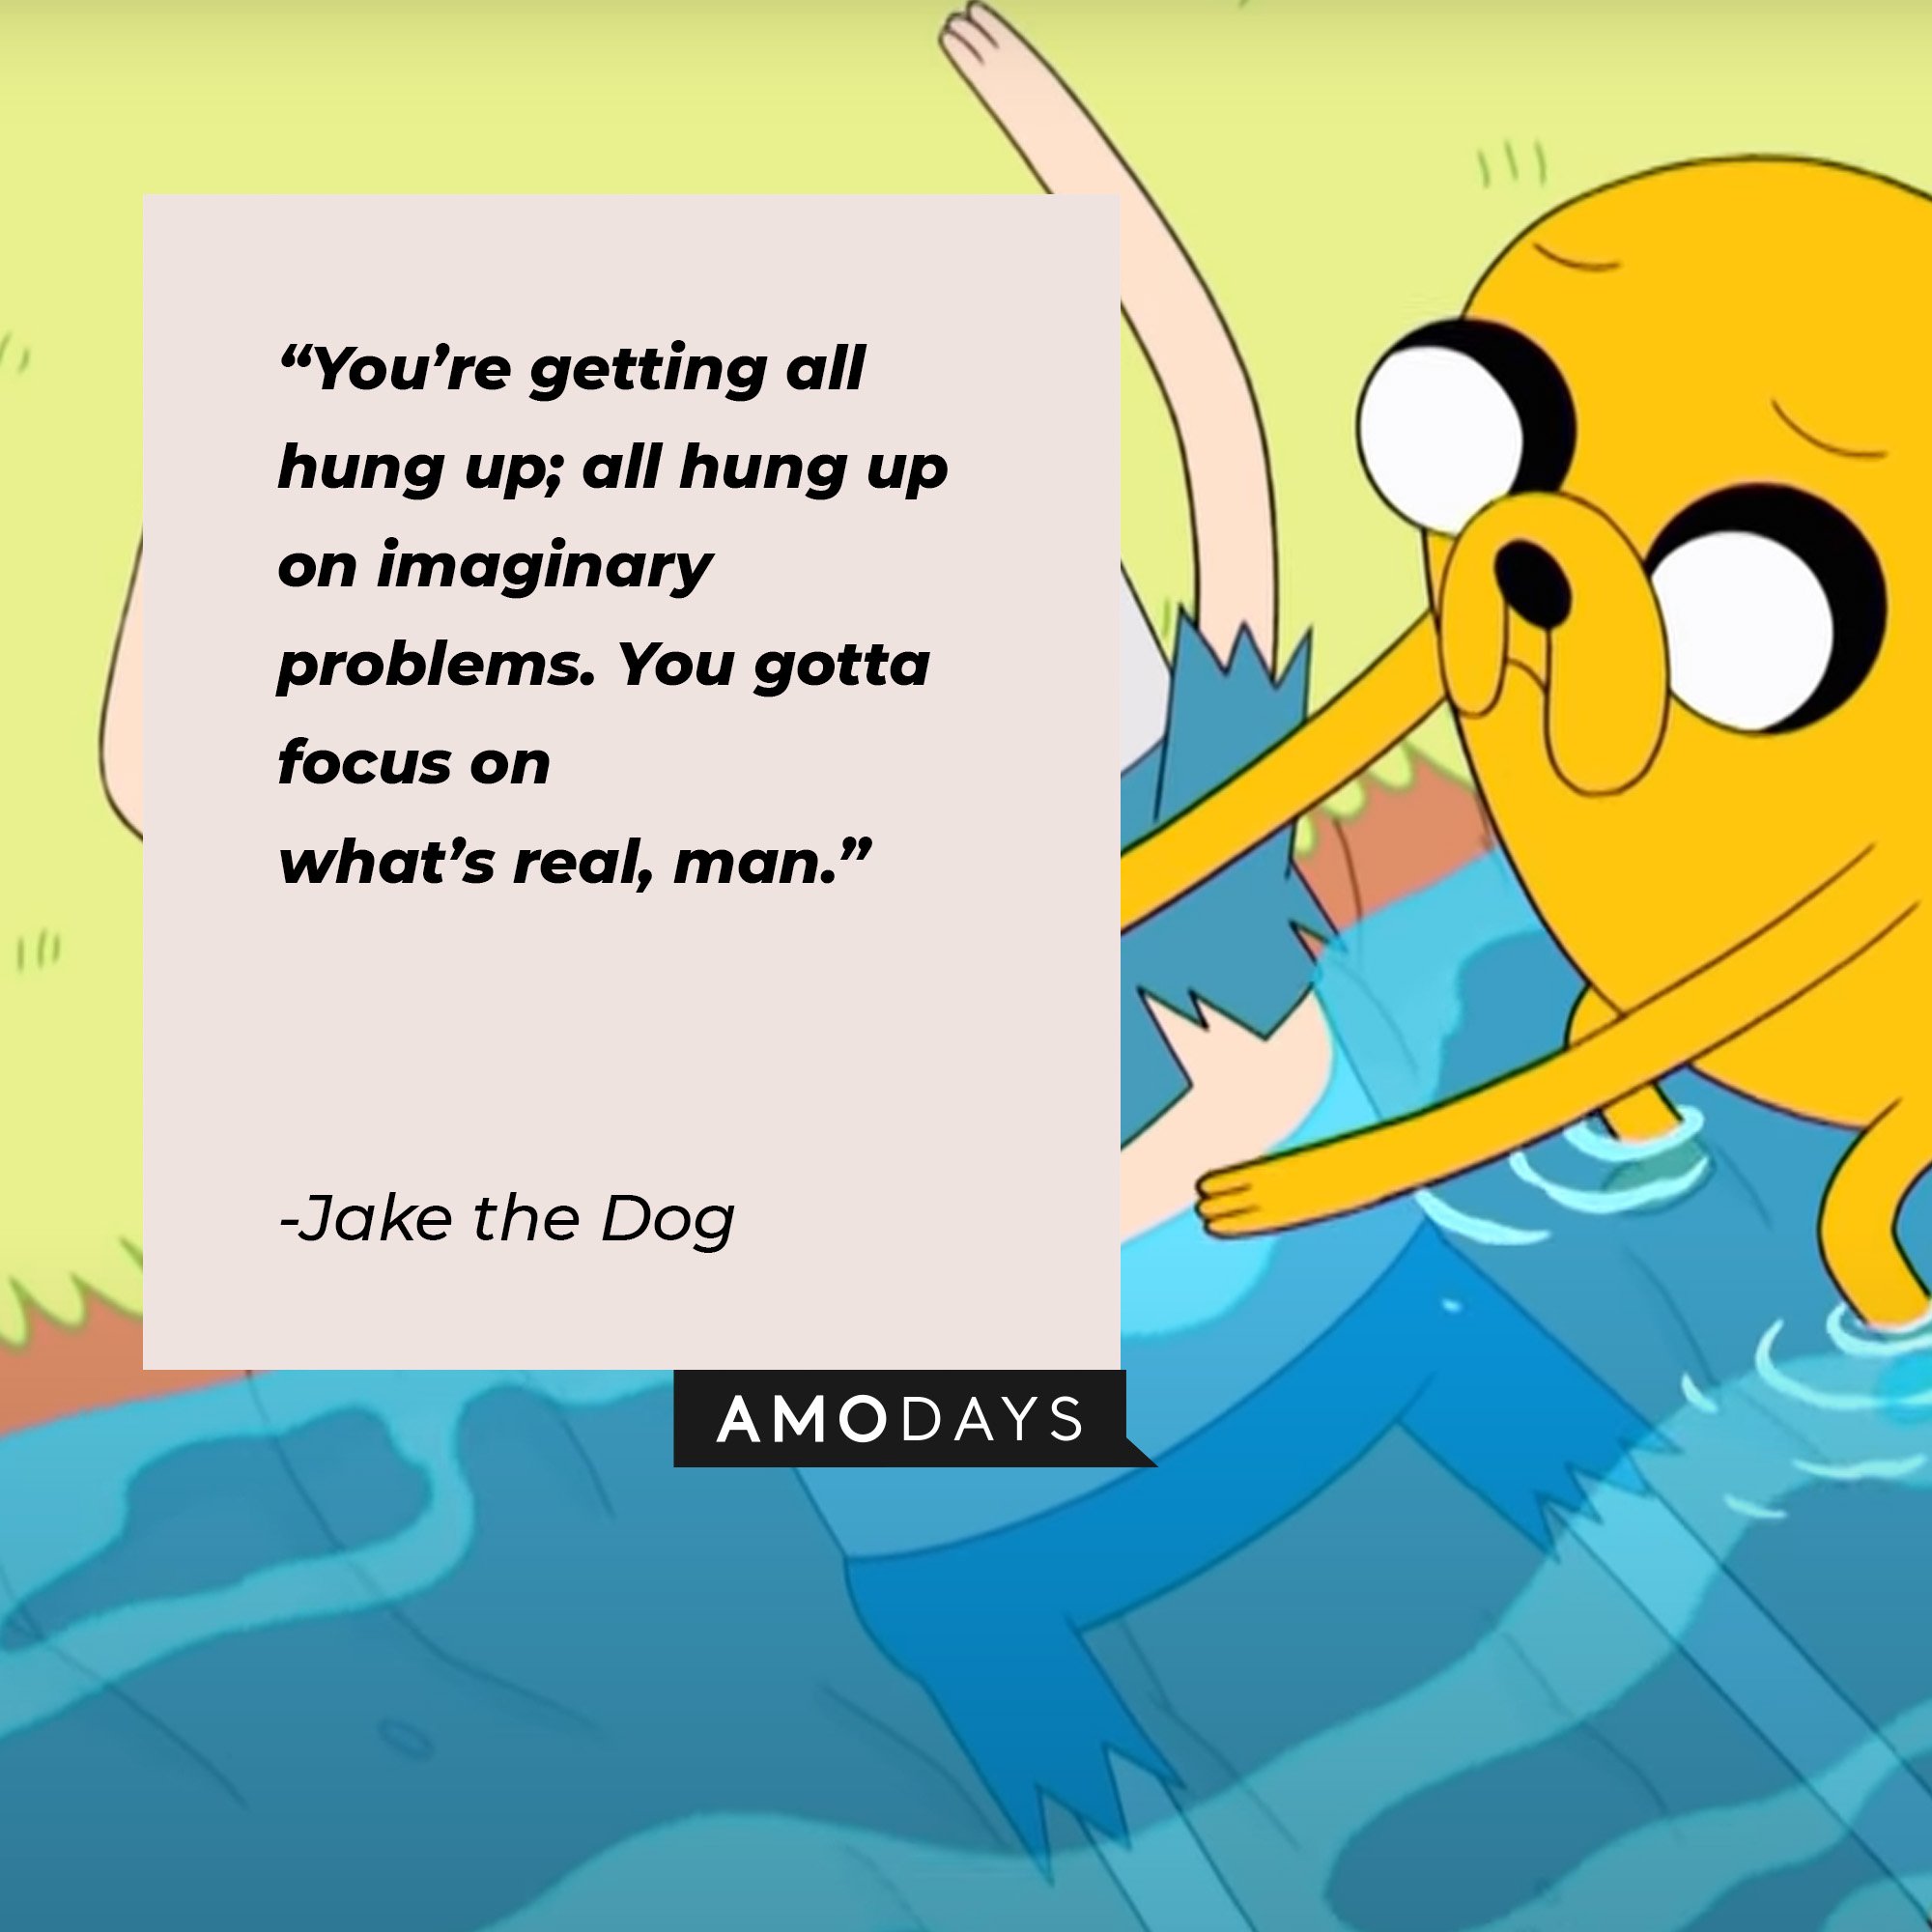   Jake the Dog’s quote: "You’re getting all hung up; all hung up on imaginary problems. You gotta focus on what’s real, man." | Image: AmoDays